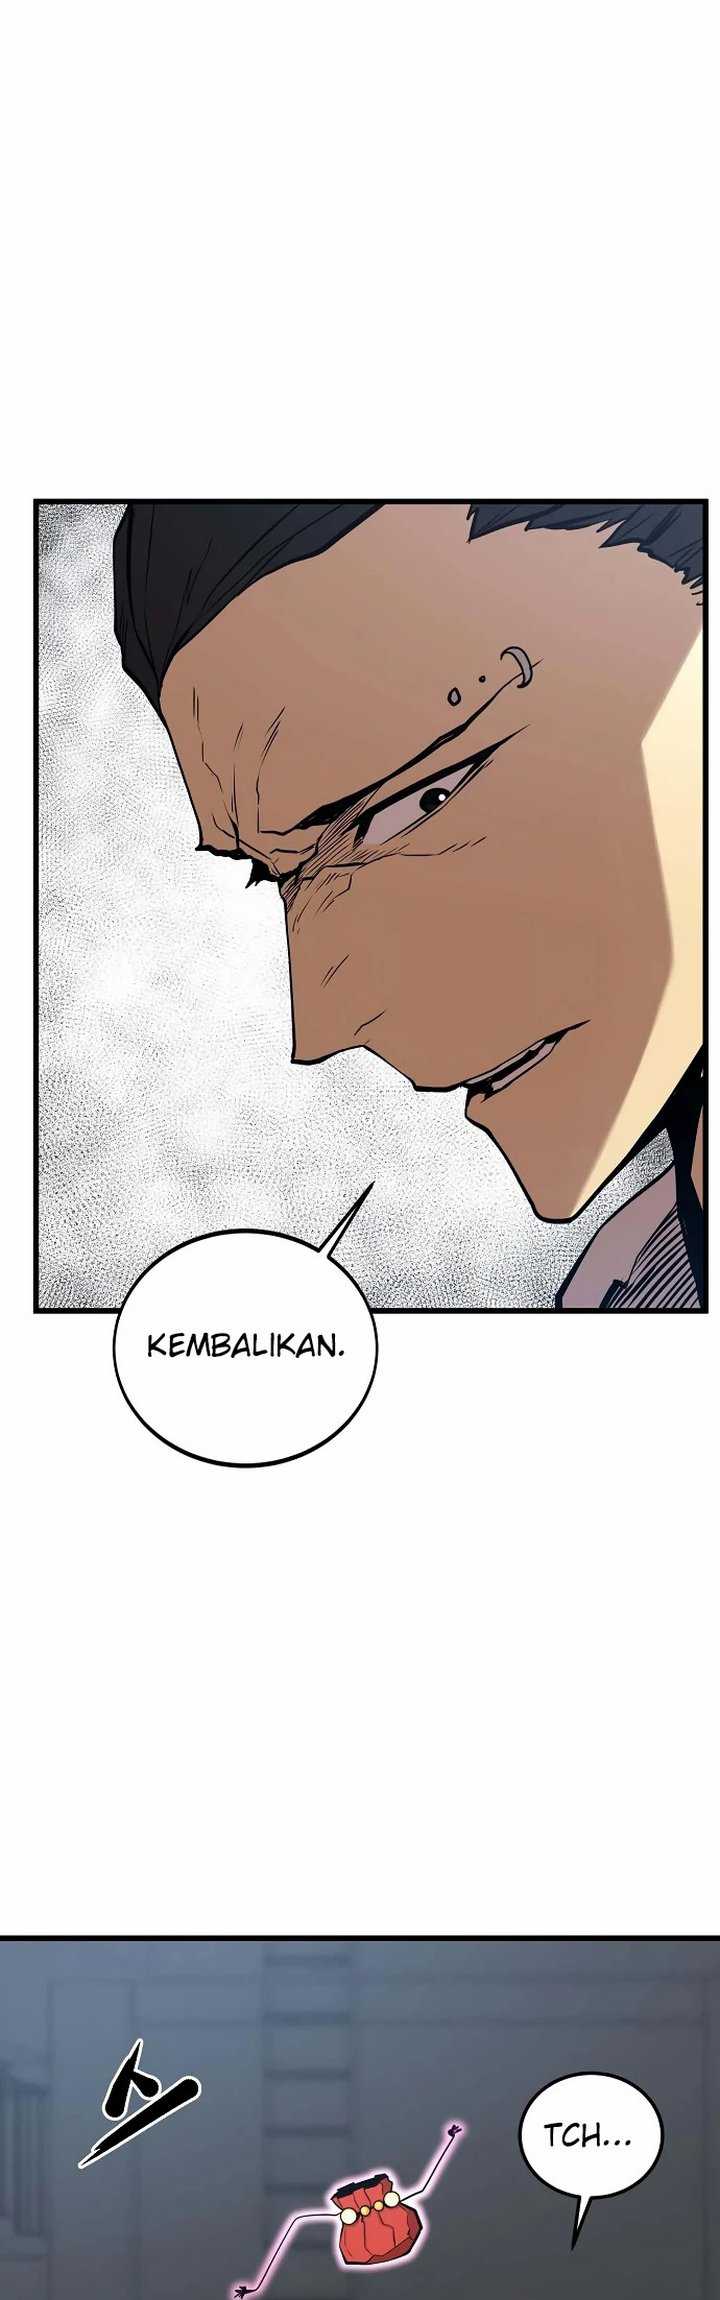 The Monstrous Gui Chapter 28 Bahasa indonesia